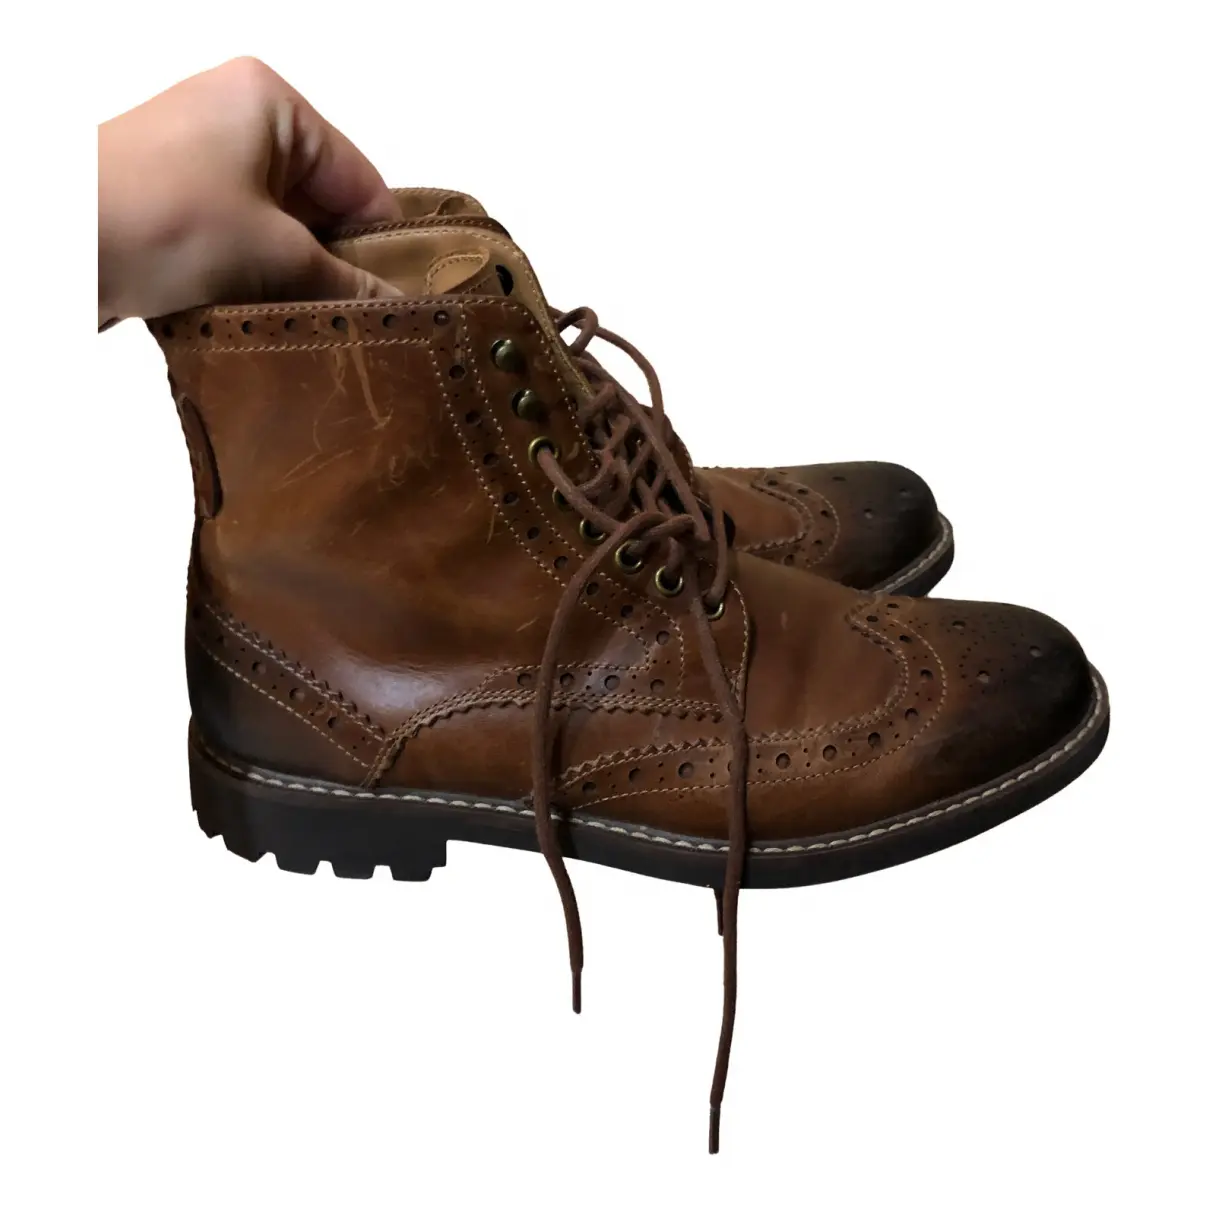 Buy Clarks Leather boots online